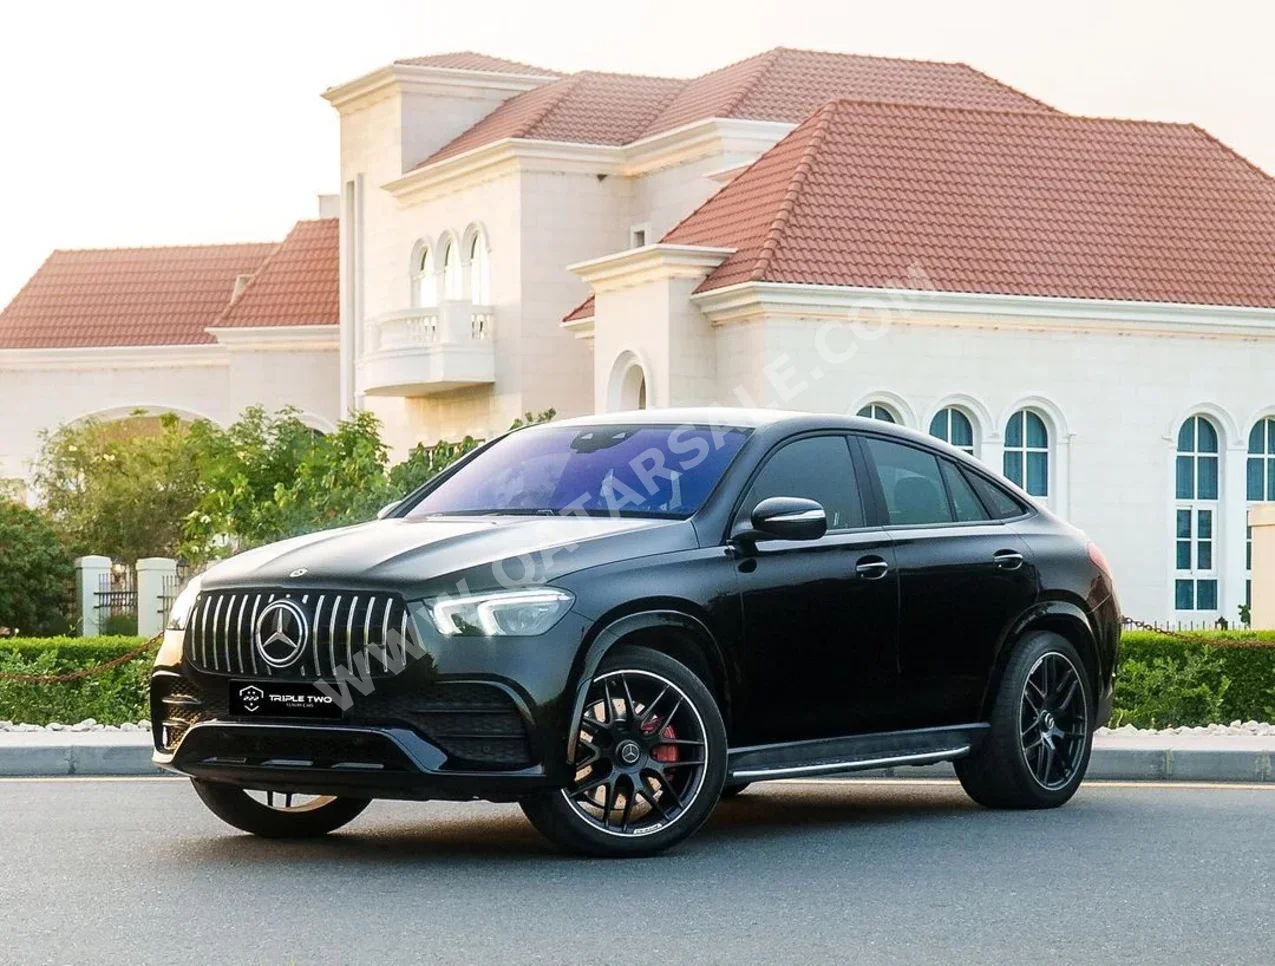 Mercedes-Benz  GLE  53 AMG  2022  Automatic  35,000 Km  8 Cylinder  Four Wheel Drive (4WD)  SUV  Black  With Warranty